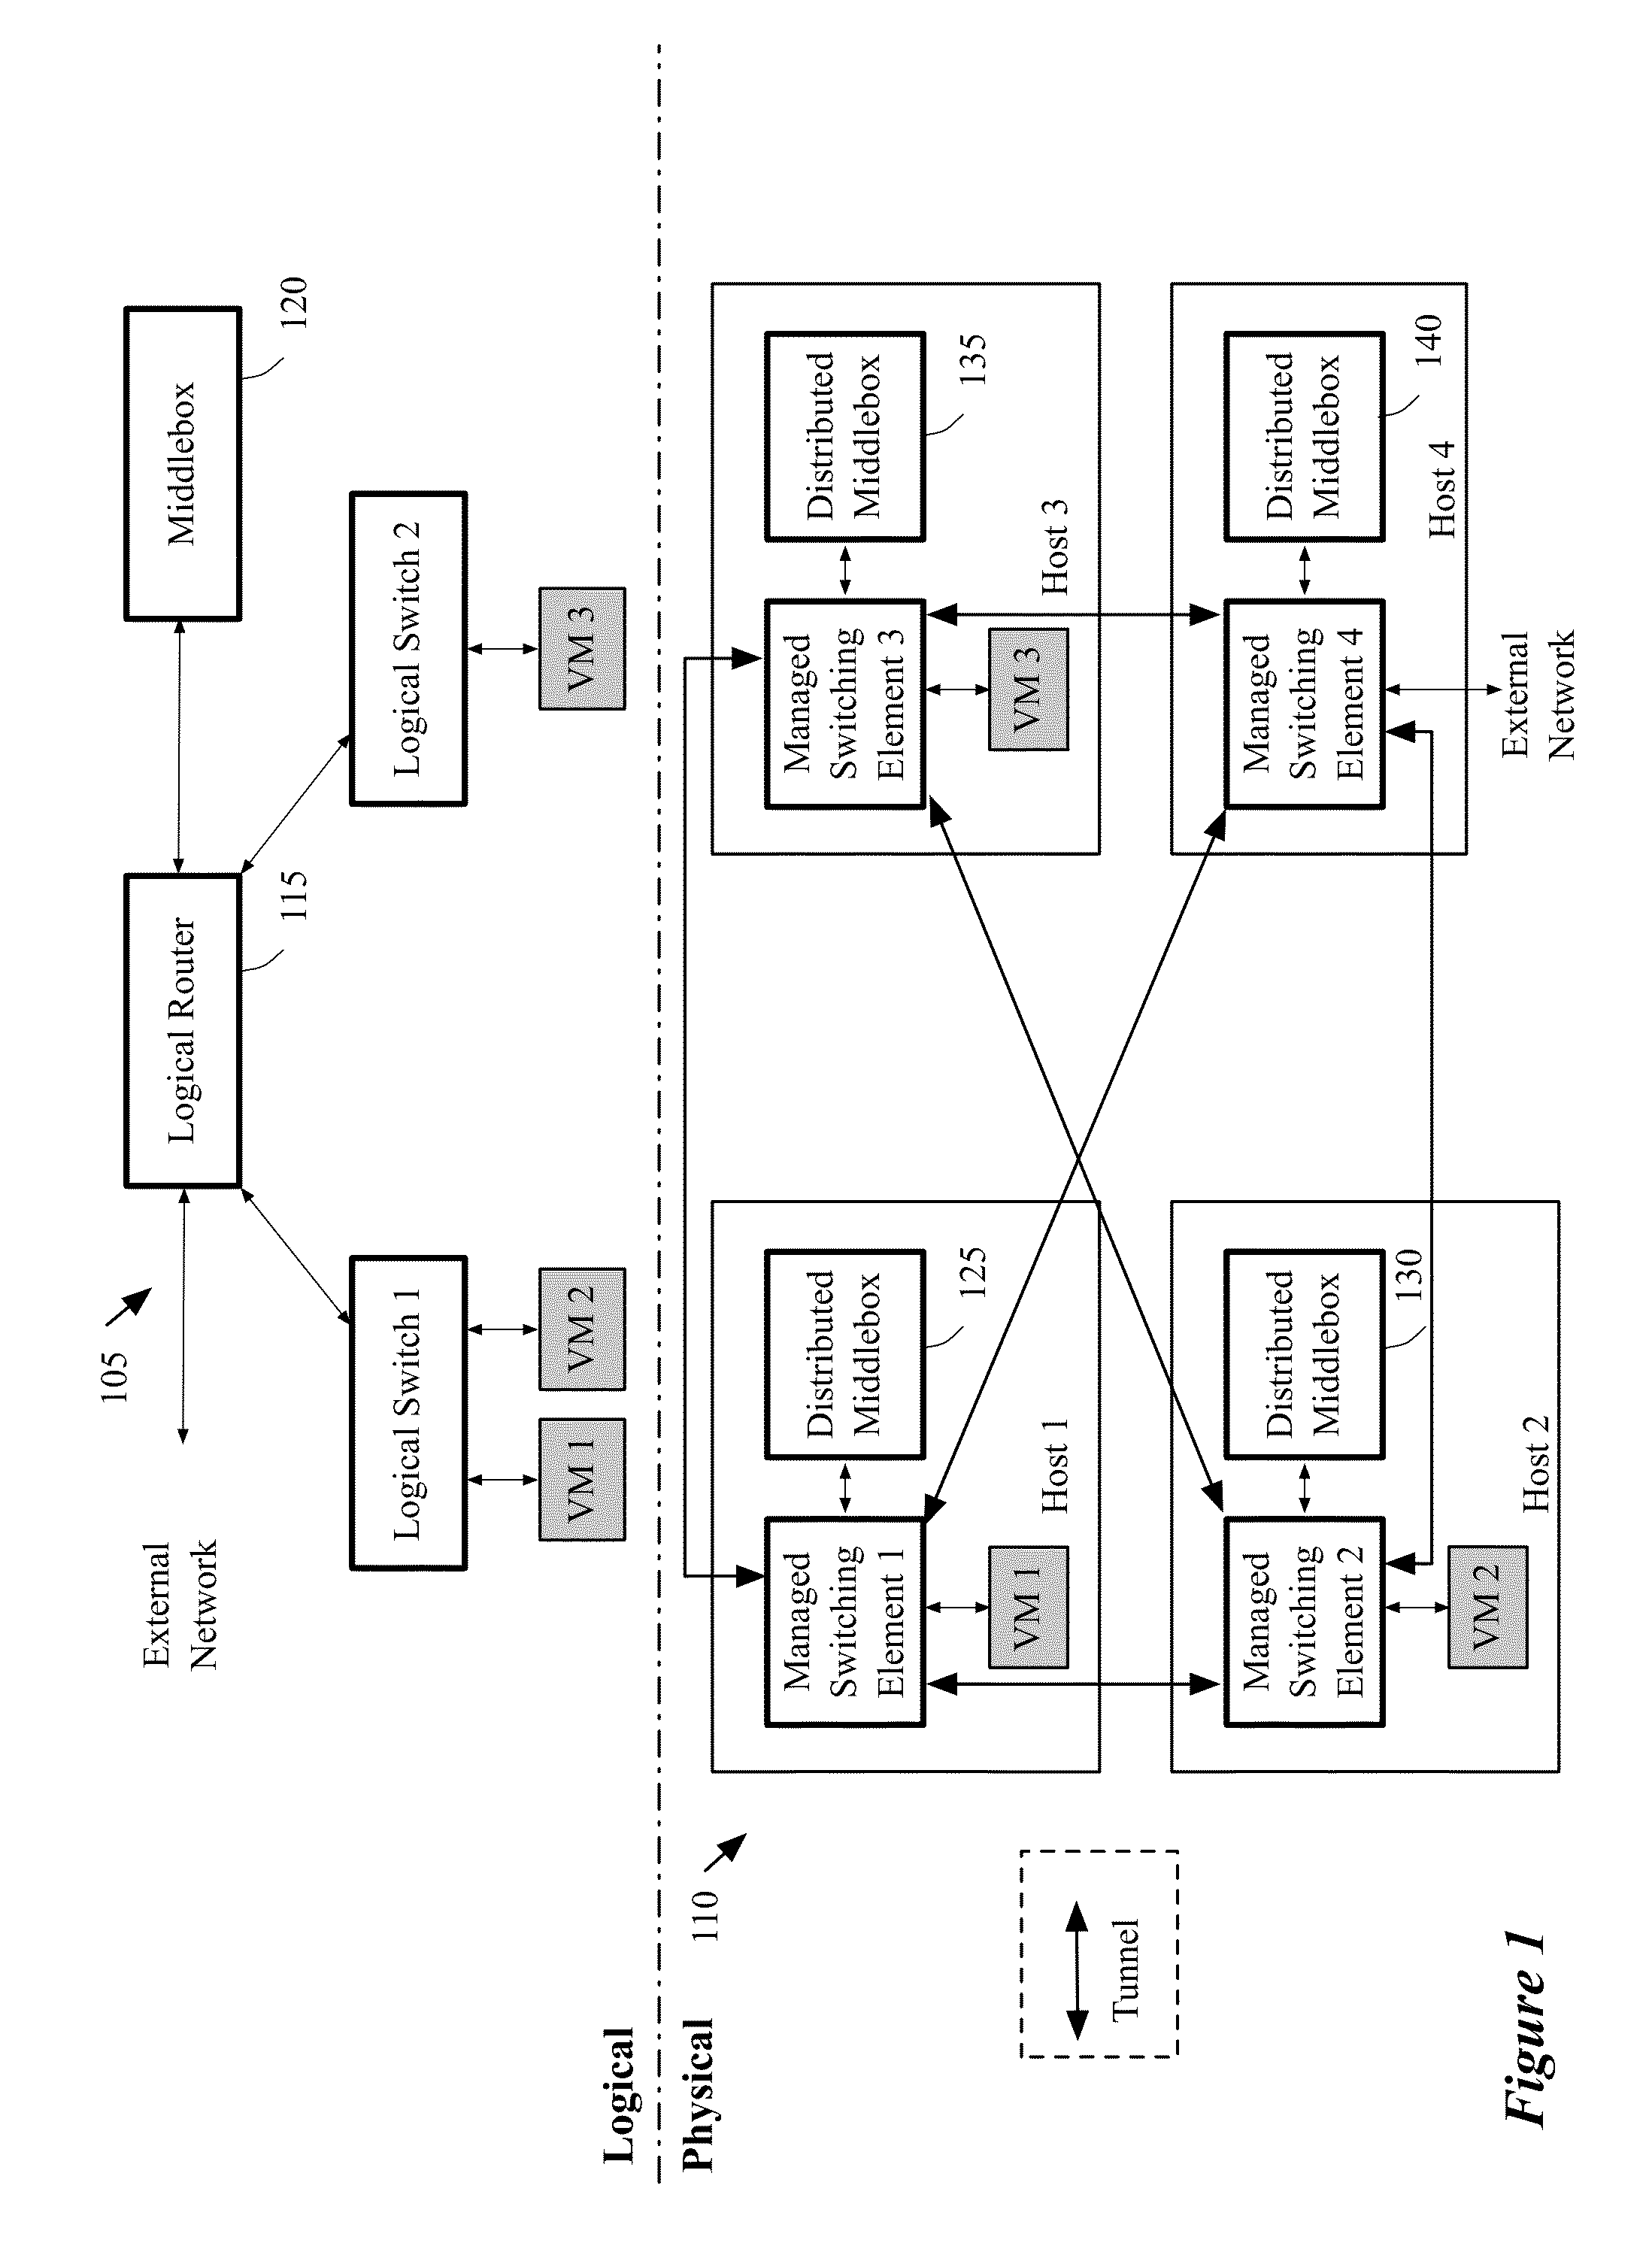 Connection identifier assignment and source network address translation